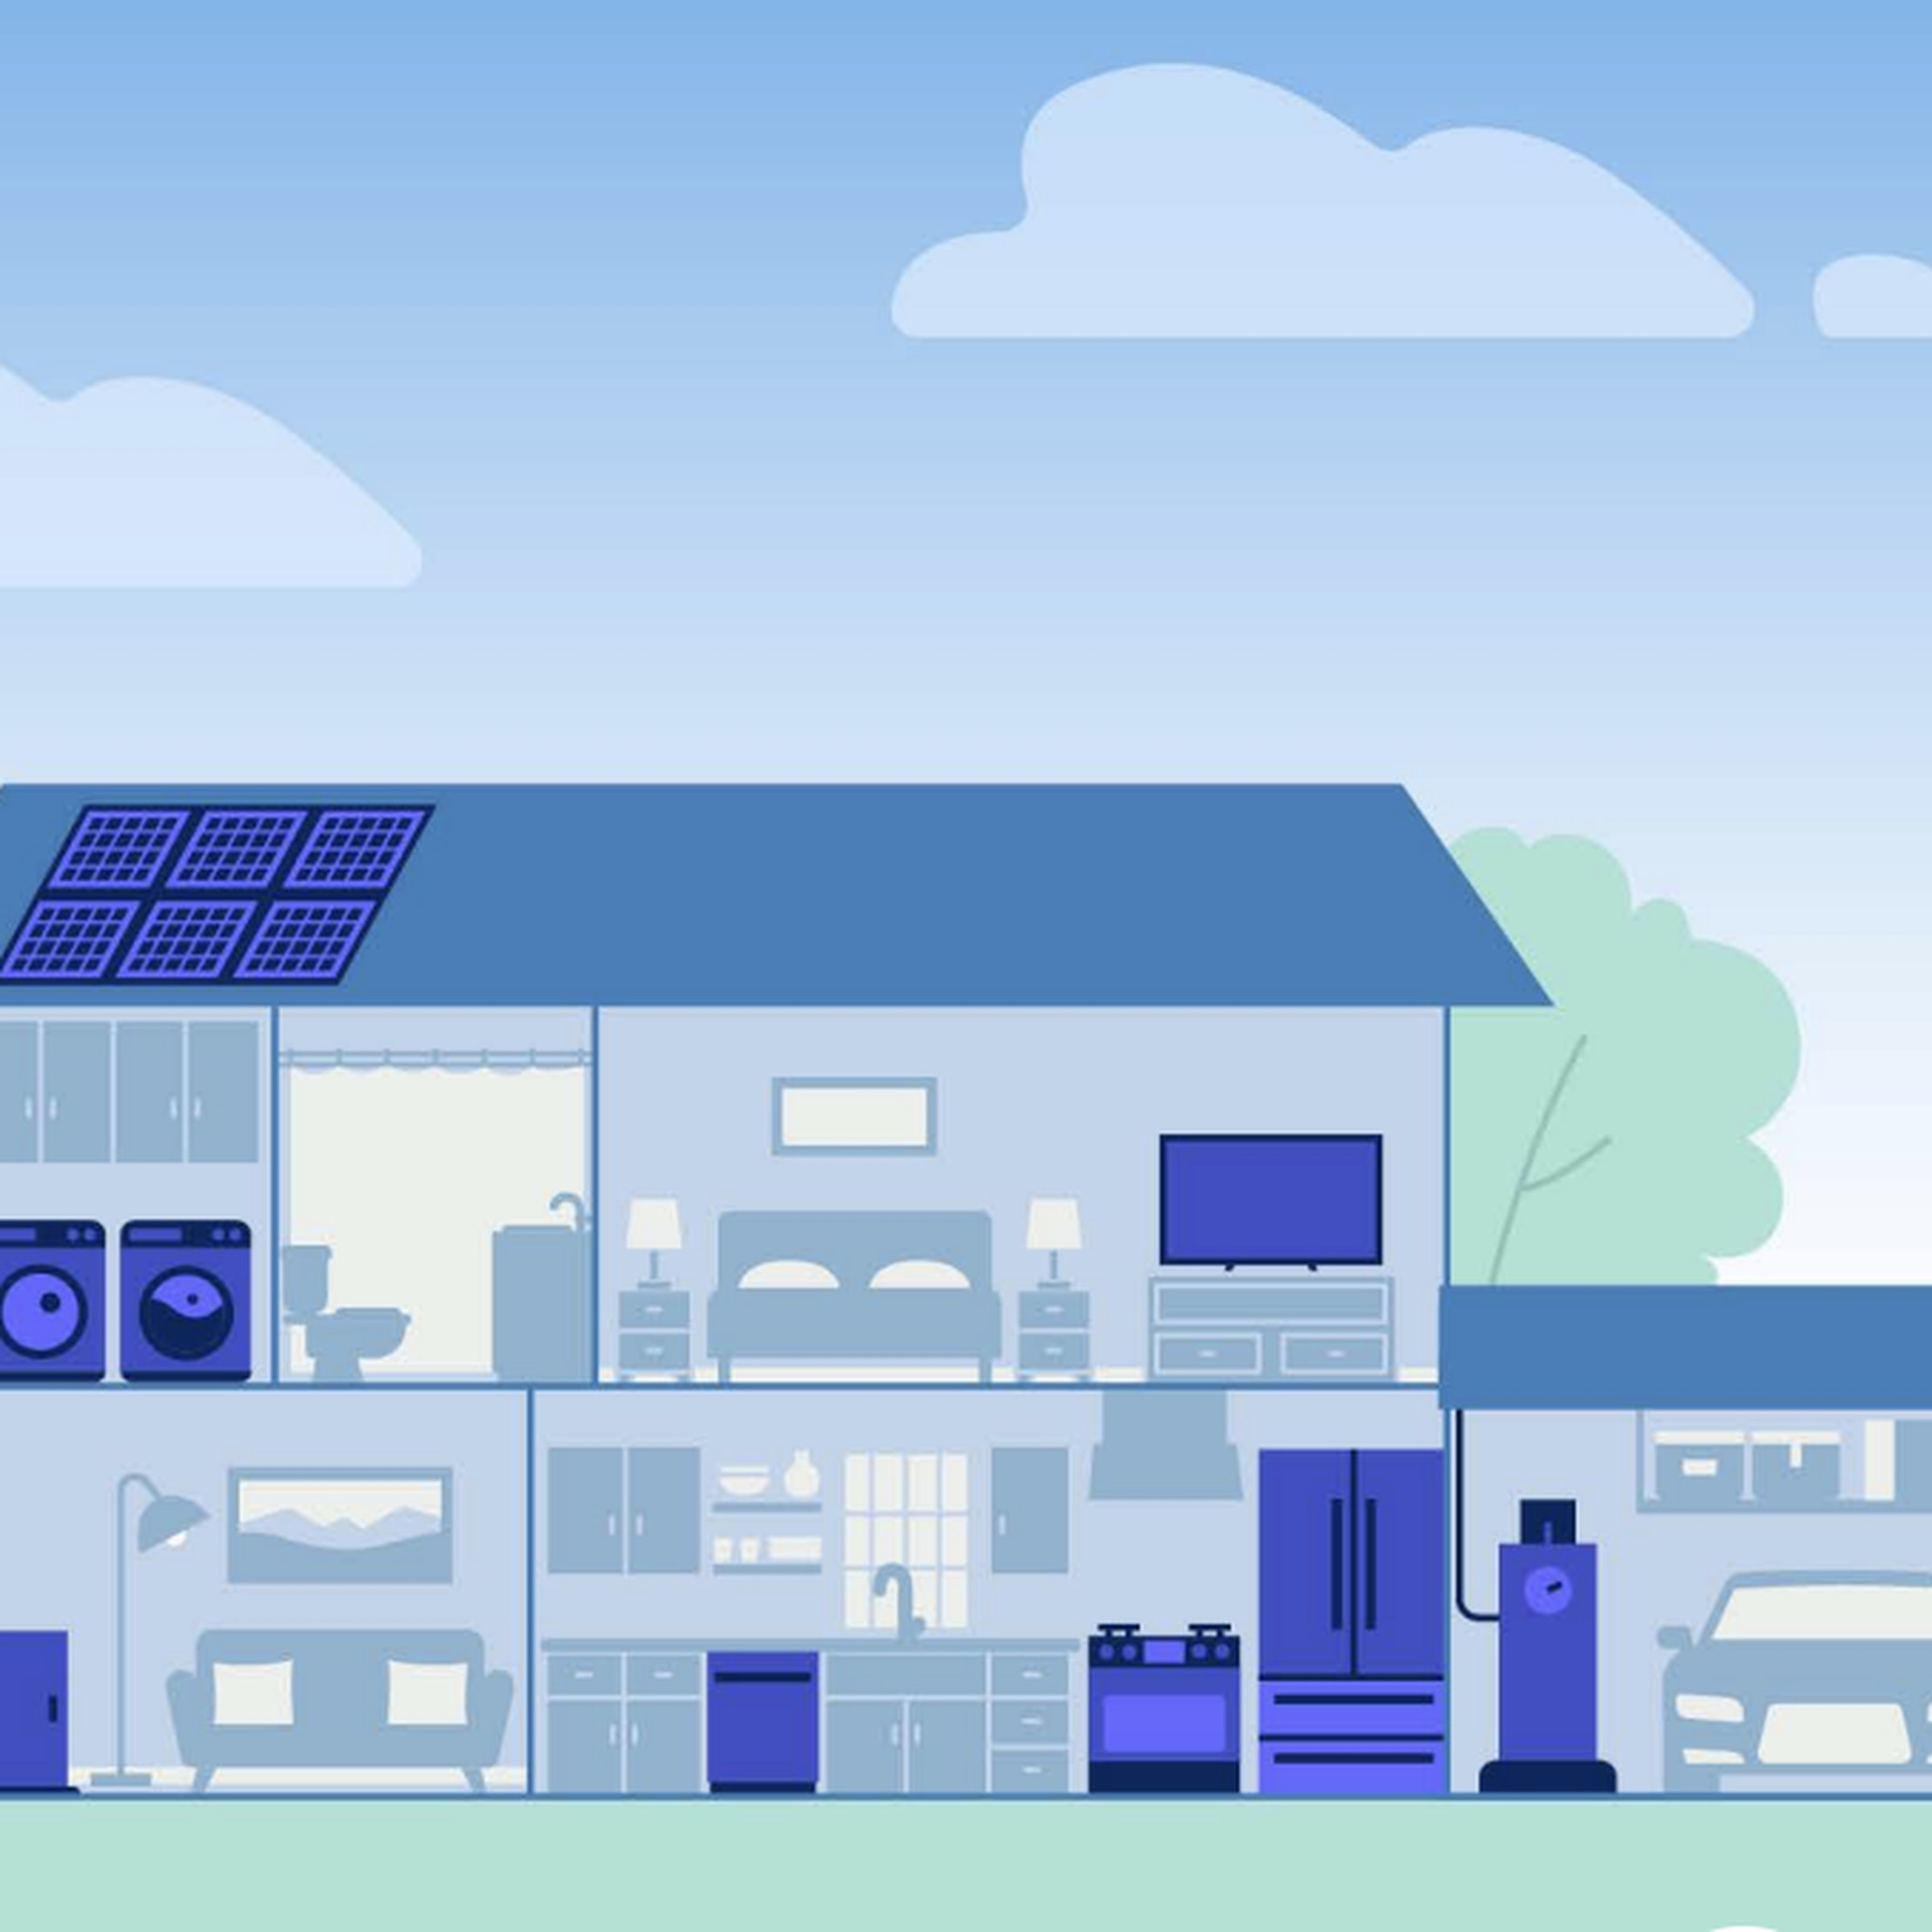 Smart fridges, washing machines, and more can connect to the smart grid to adjust energy use based on demand and save you cash.